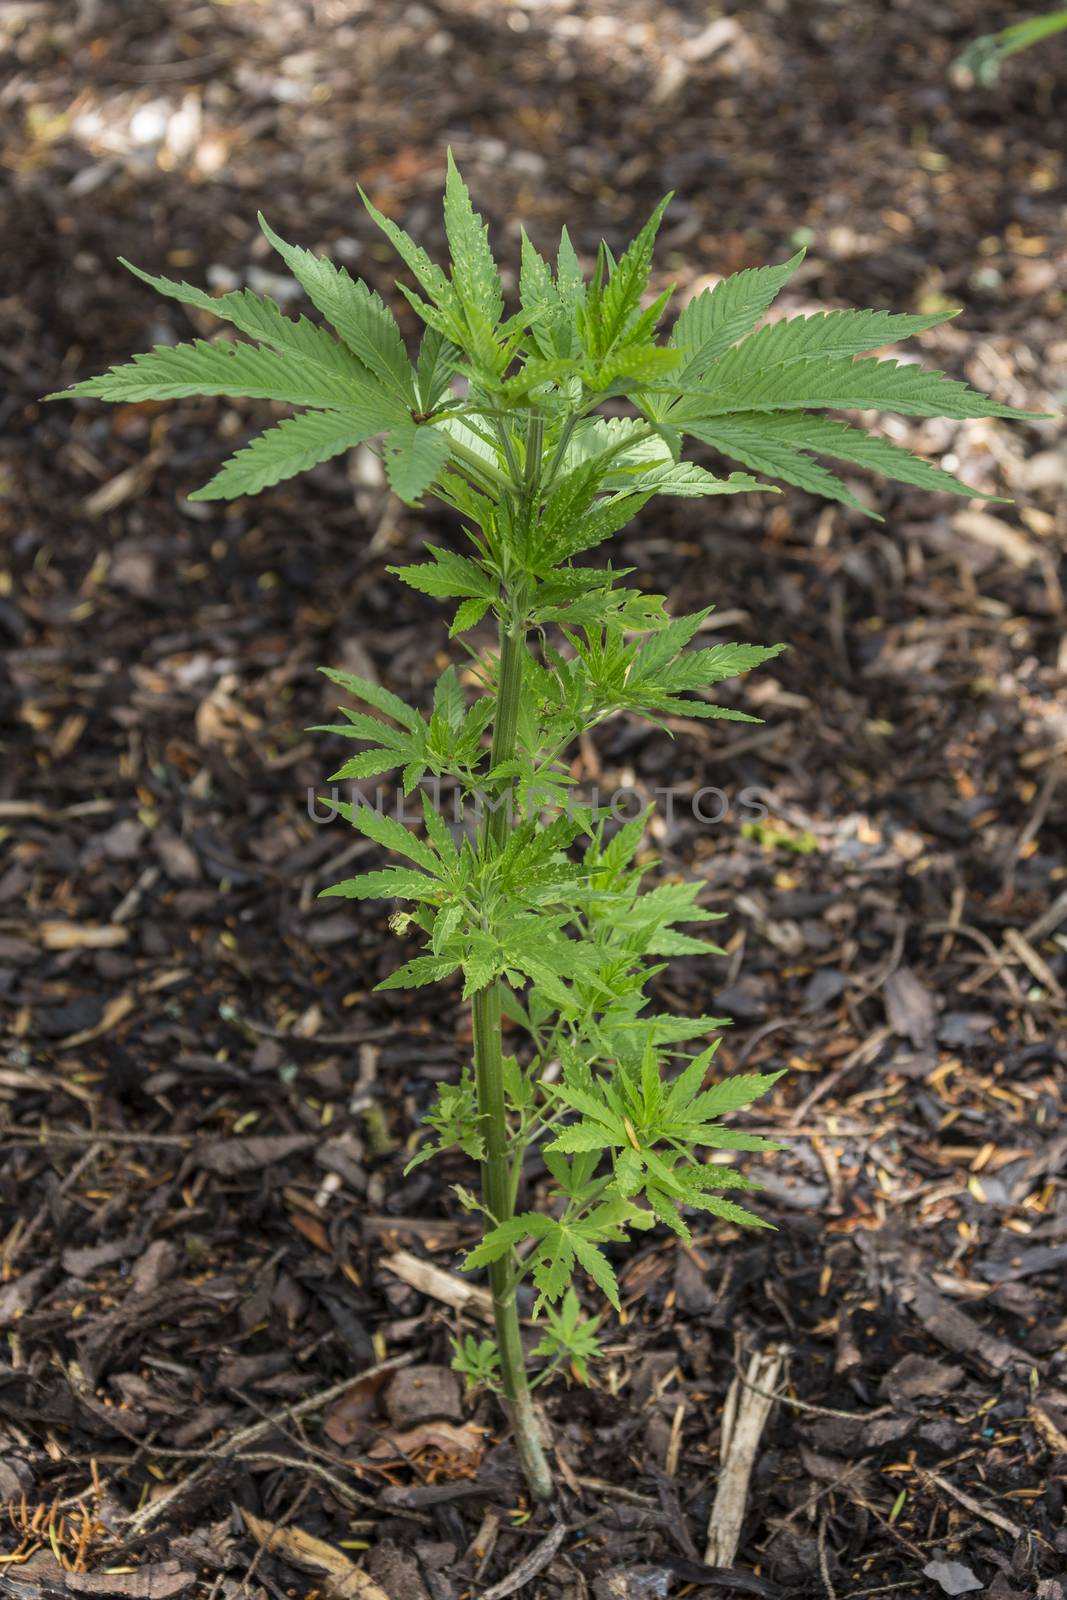 Cannabis Plant - Cannabis has long been used for hemp fibre, for hemp oils, for medicinal purposes, and as a recreational drug. Industrial hemp products are made from cannabis plants selected to produce an abundance of fiber. To satisfy the UN Narcotics Convention, some cannabis strains have been bred to produce minimal levels of tetrahydrocannabinol (THC), the principal psychoactive constituent. Many plants have been selectively bred to produce a maximum of THC (cannabinoids), which is obtained by curing the flowers. Various compounds, including hashish and hash oil, are extracted from the plant